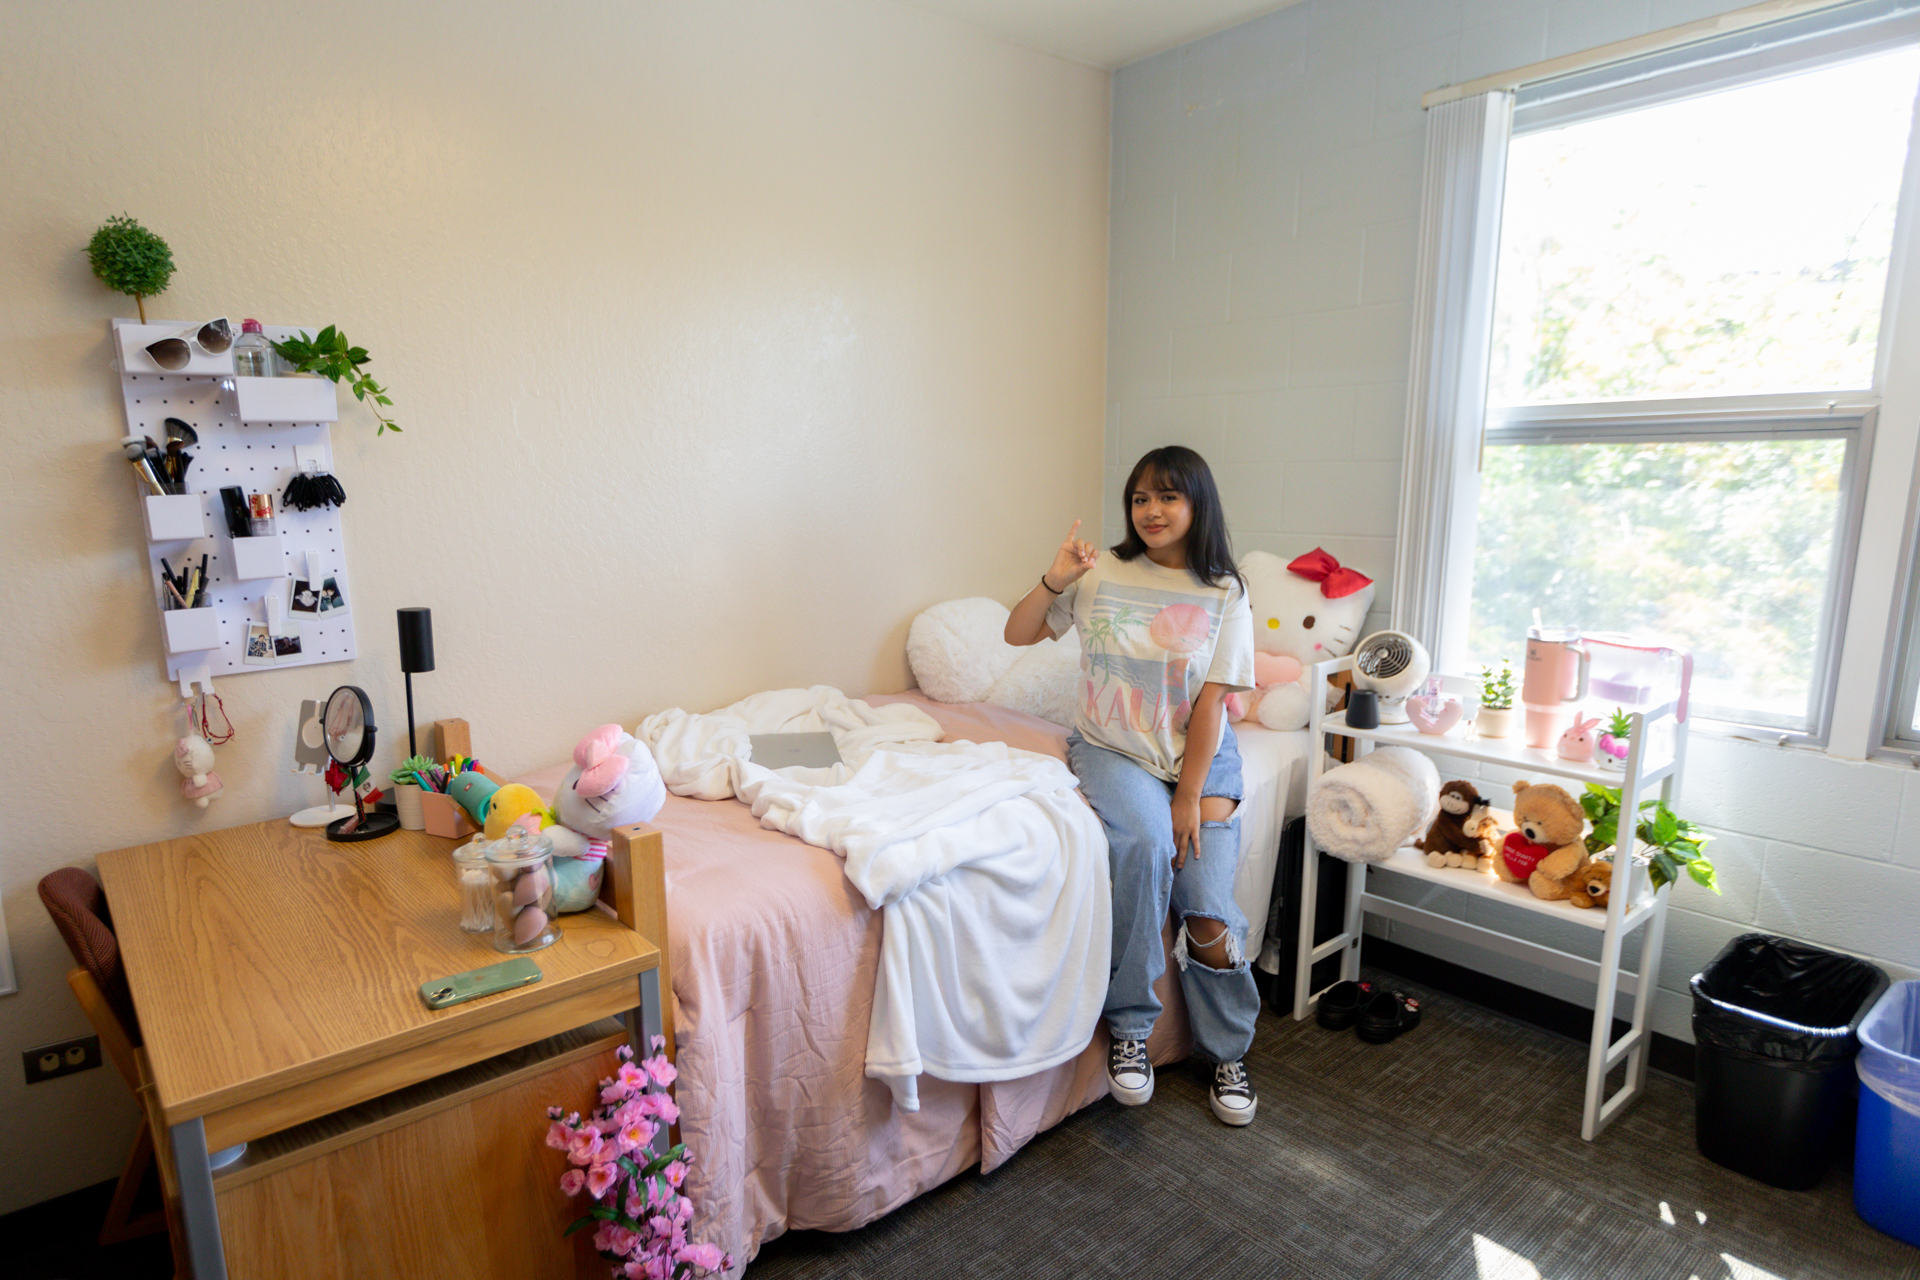 A student shows off her decorated room at a residence hall in Sac State's North Village.